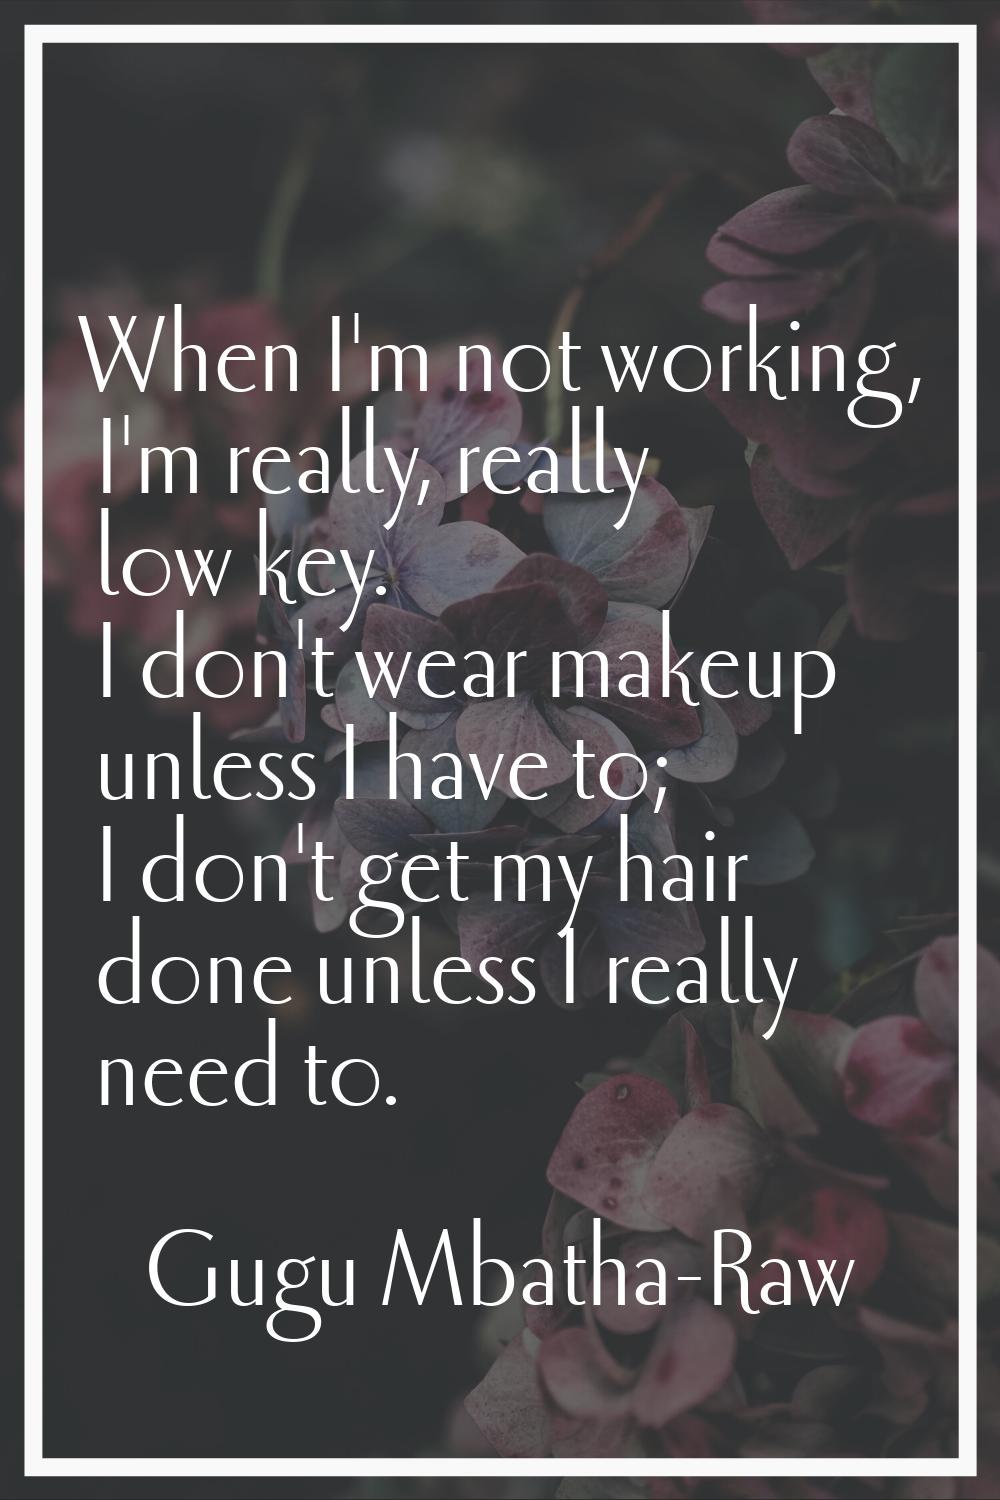 When I'm not working, I'm really, really low key. I don't wear makeup unless I have to; I don't get